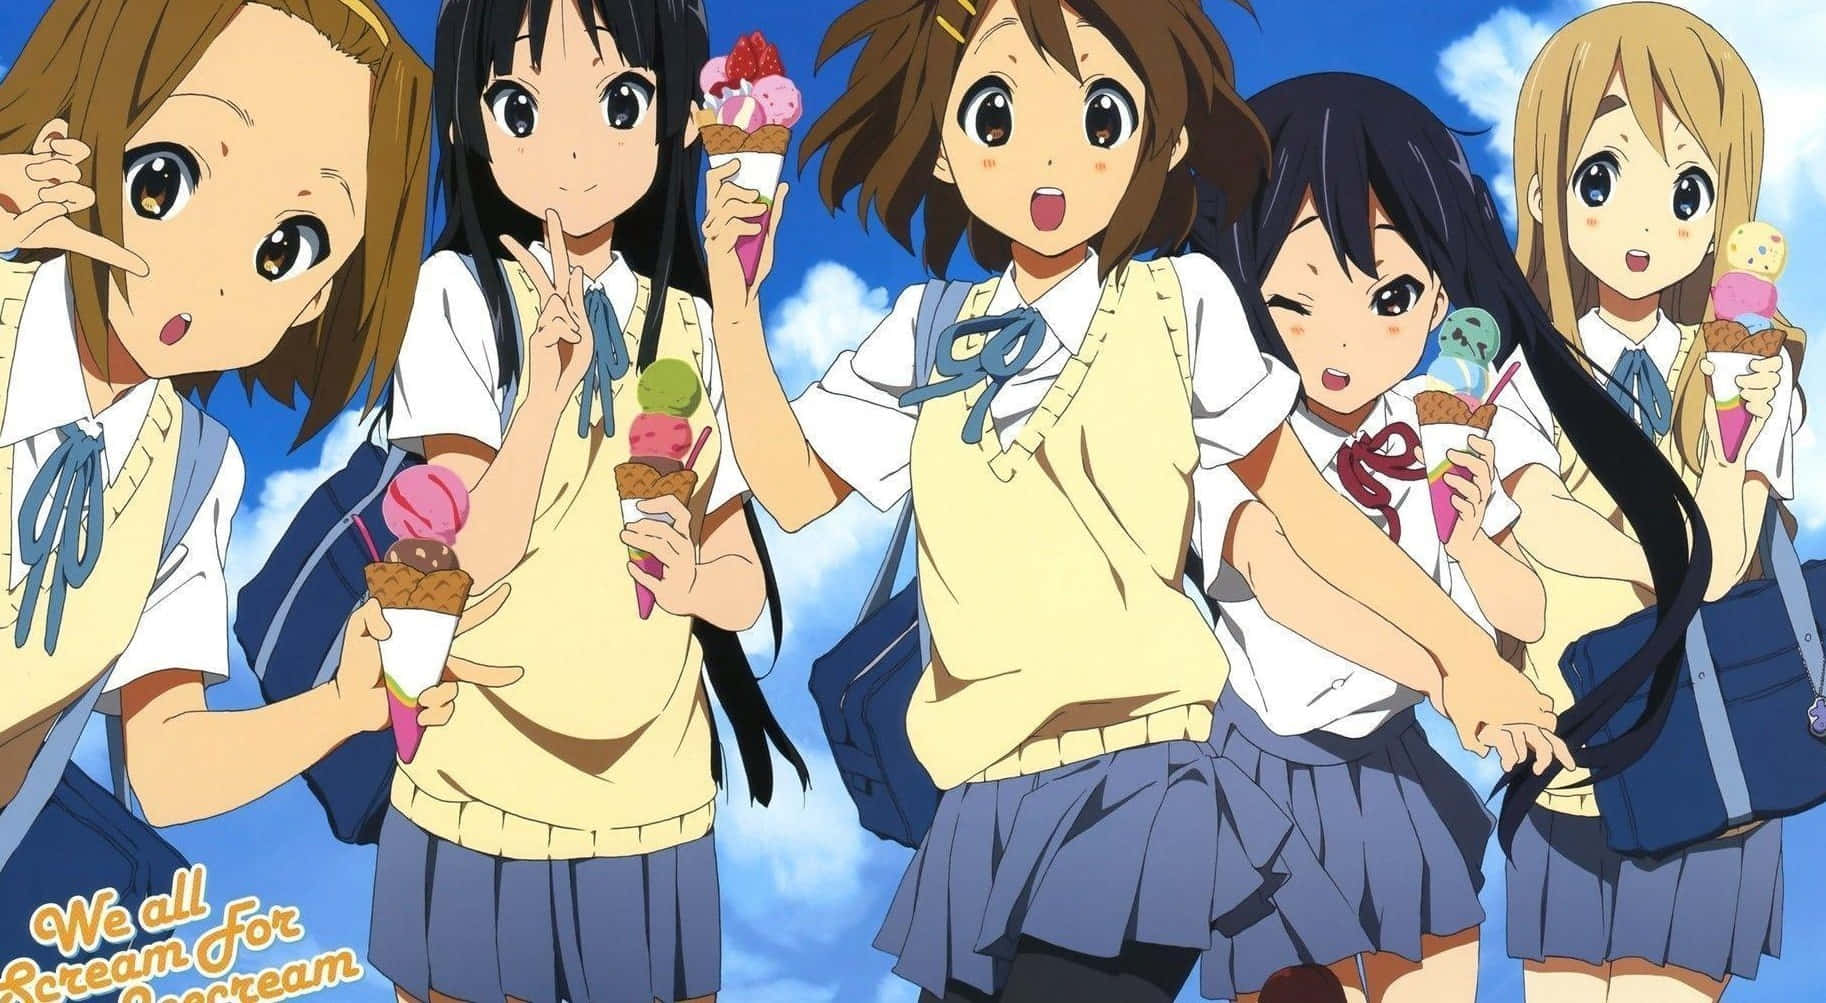 A Group Of Girls Holding Ice Cream Cones